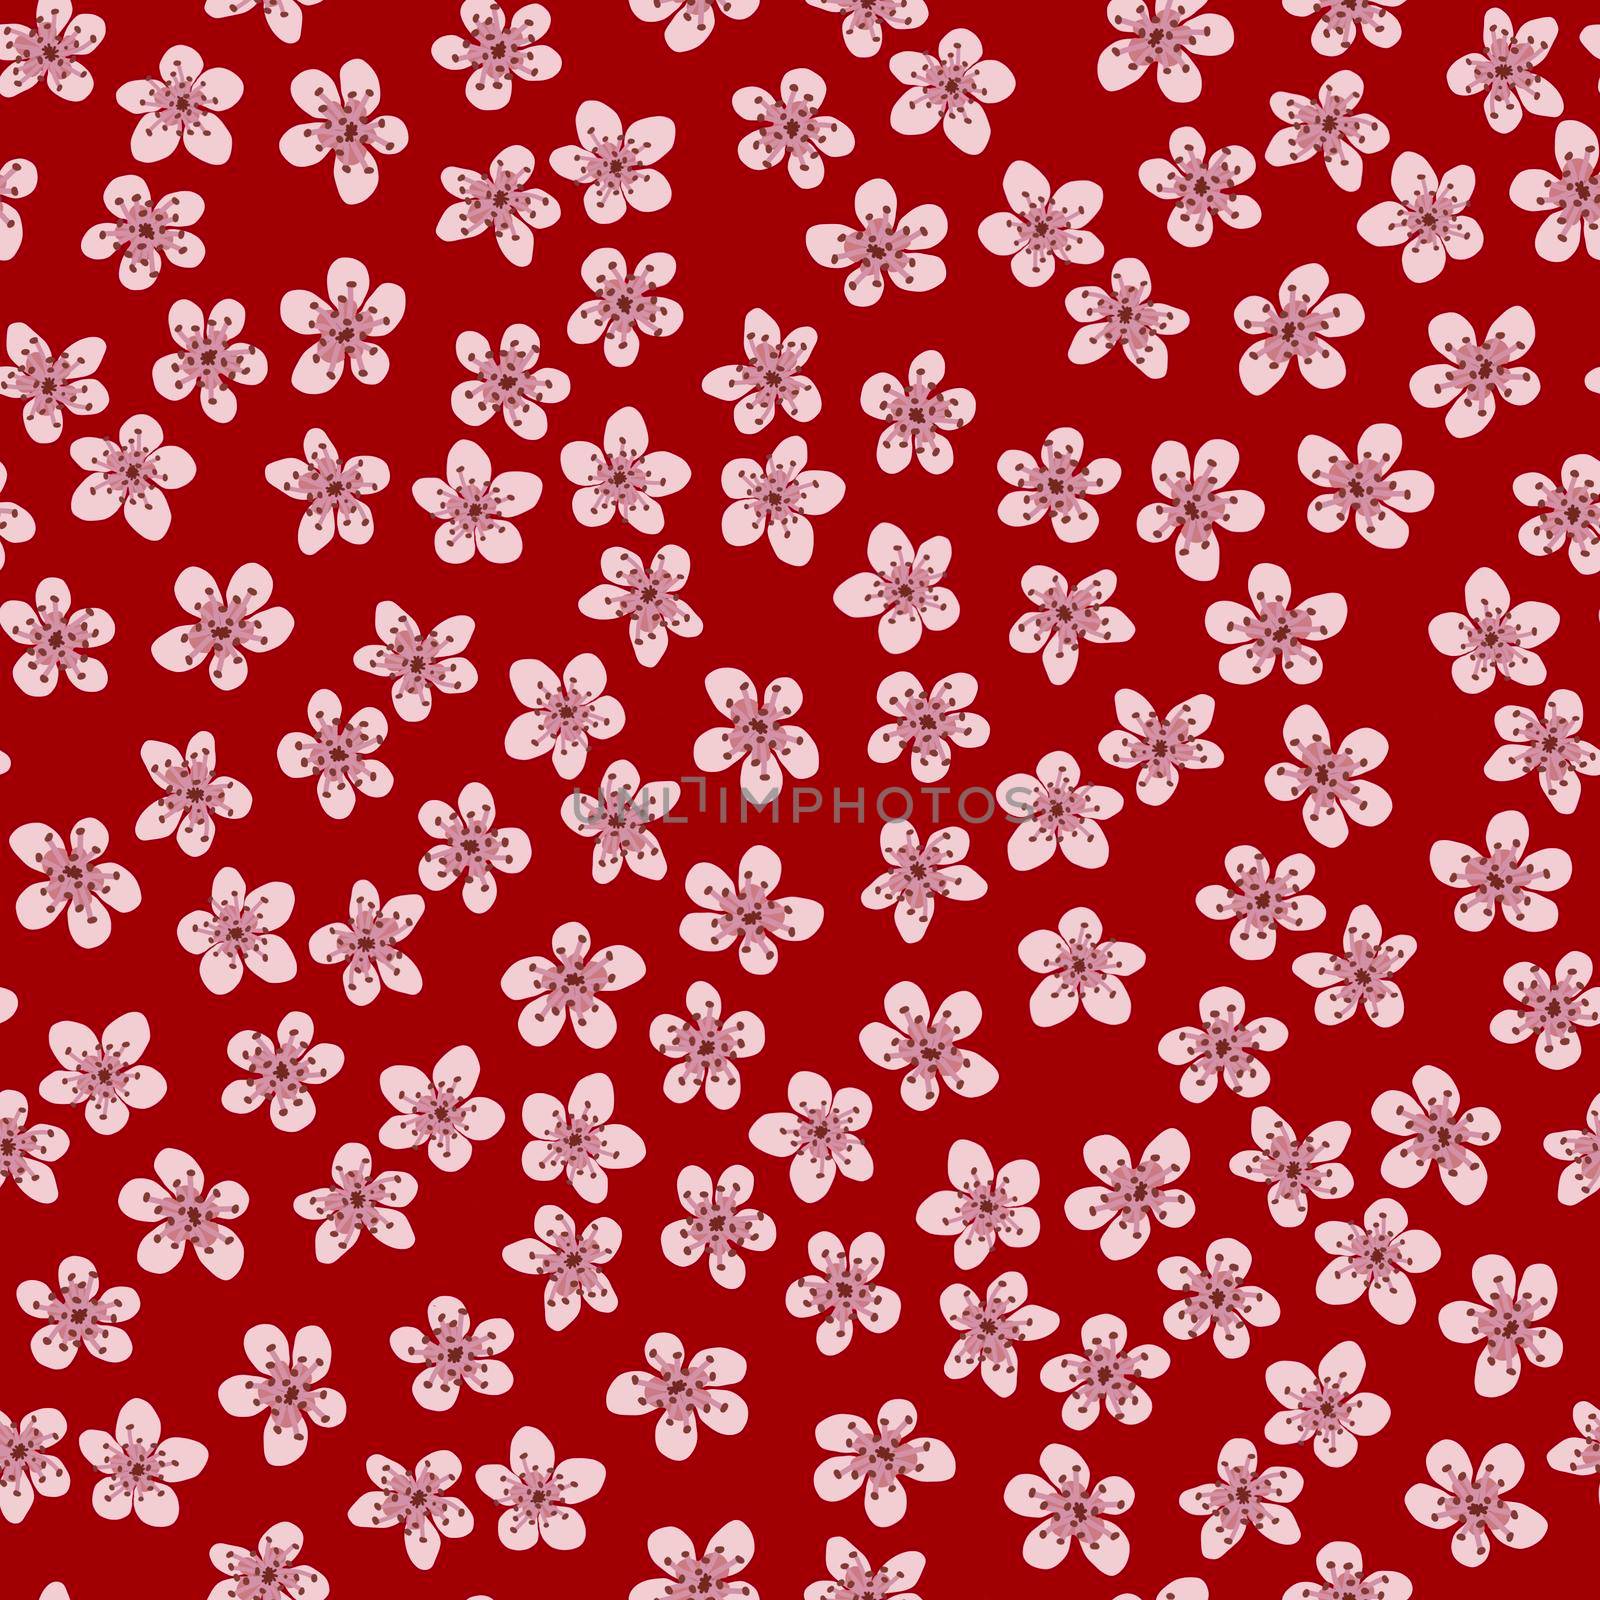 Seamless pattern with blossoming Japanese cherry sakura for fabric, packaging, wallpaper, textile decor, design, invitations, print, gift wrap, manufacturing. Pink flowers on red background. by Angelsmoon